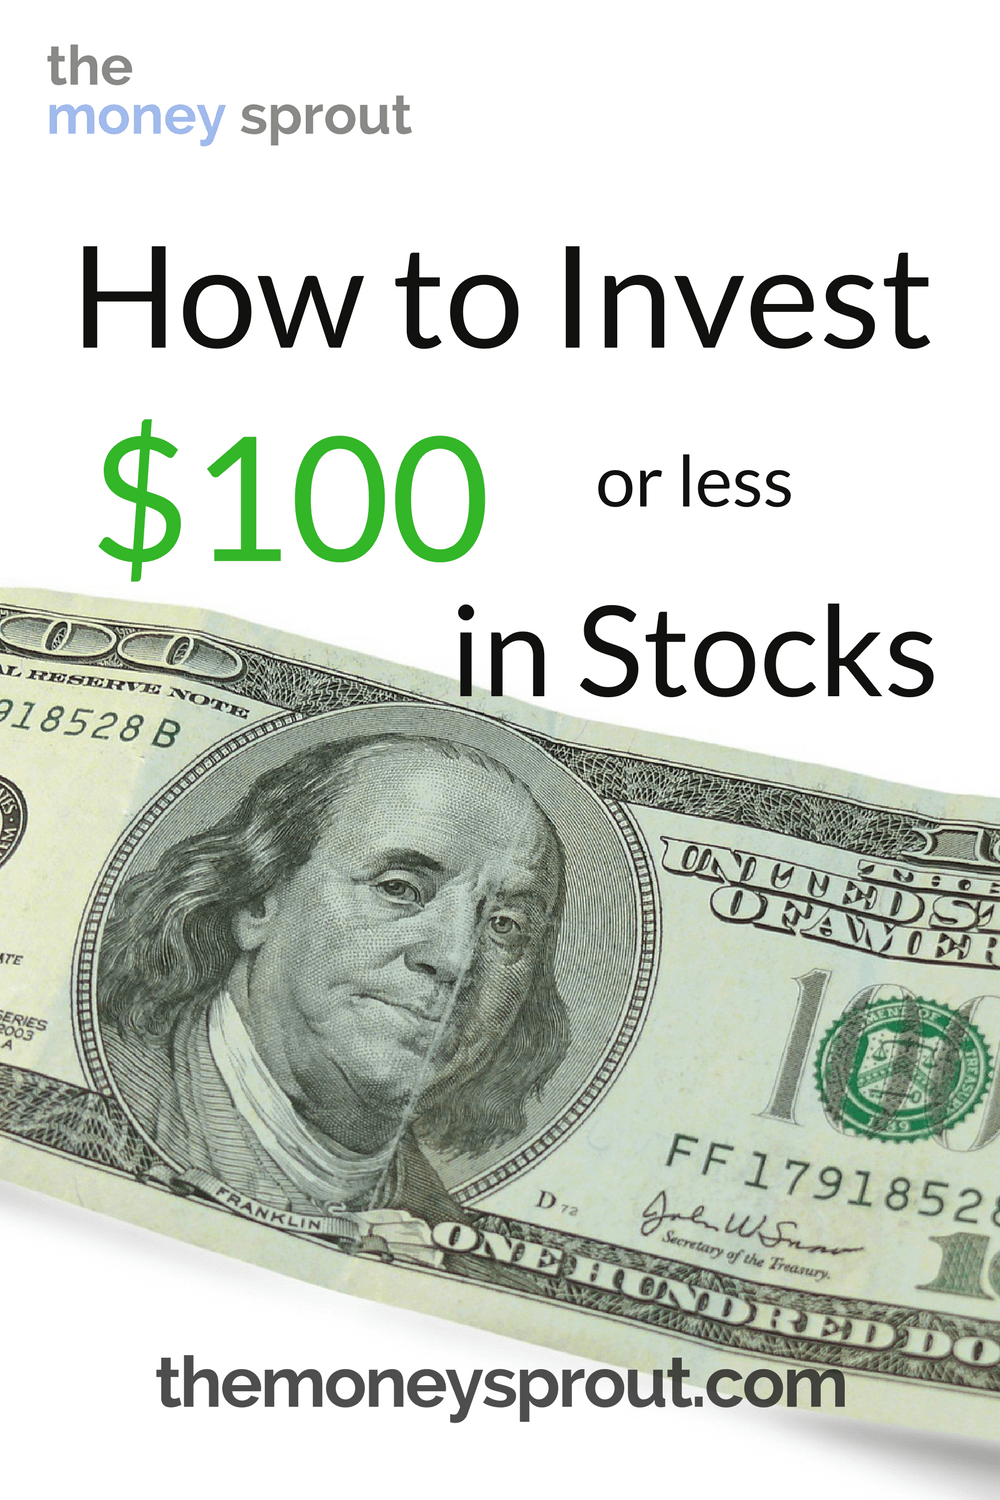 You don't need a lot of money to start investing in stocks.  You can start buying stocks now for $100 or less using this strategy.